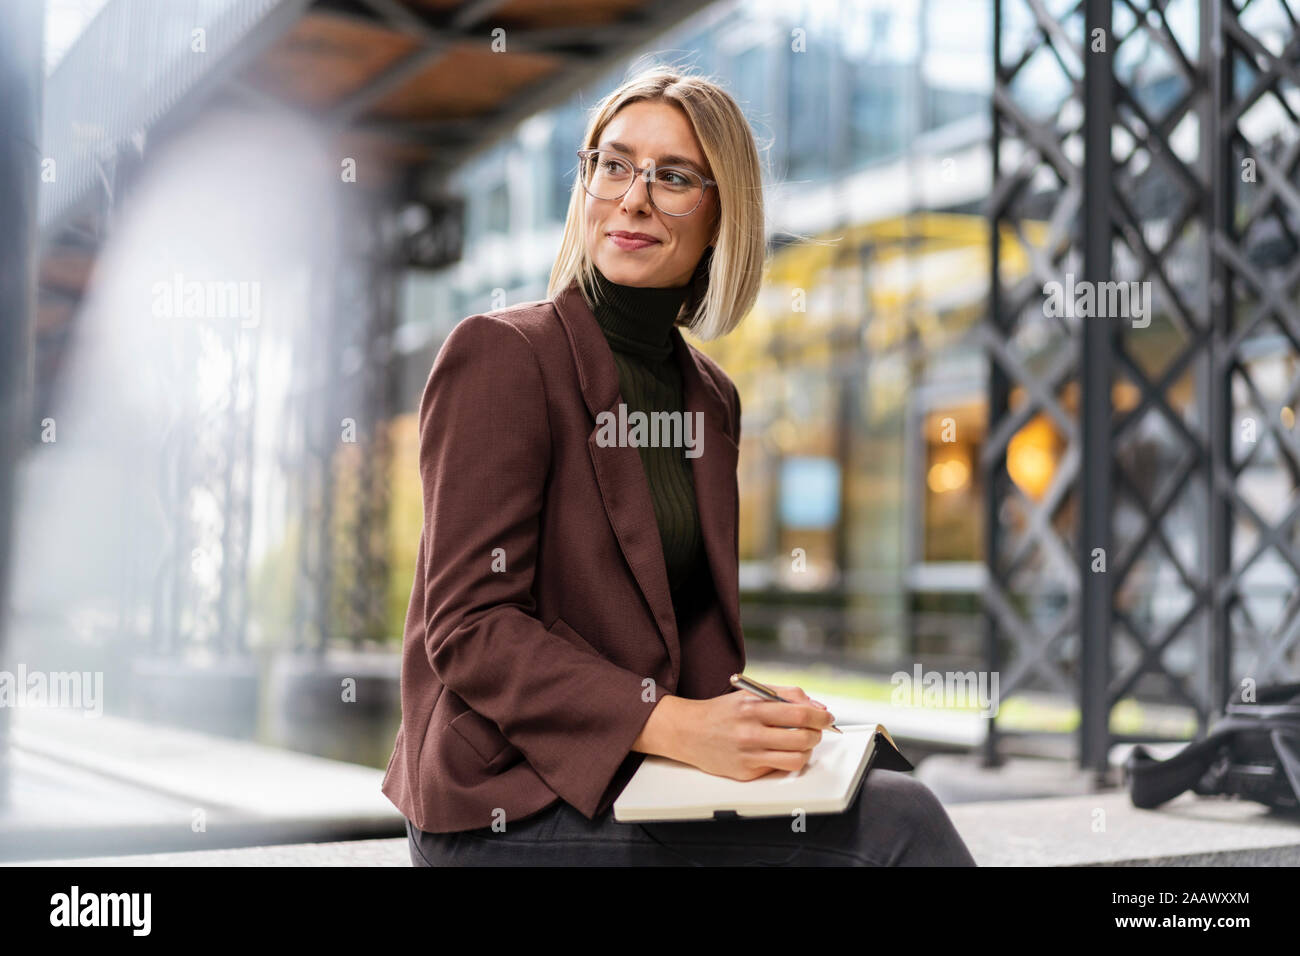 Smiling young businesswoman with notebook in the city Stock Photo